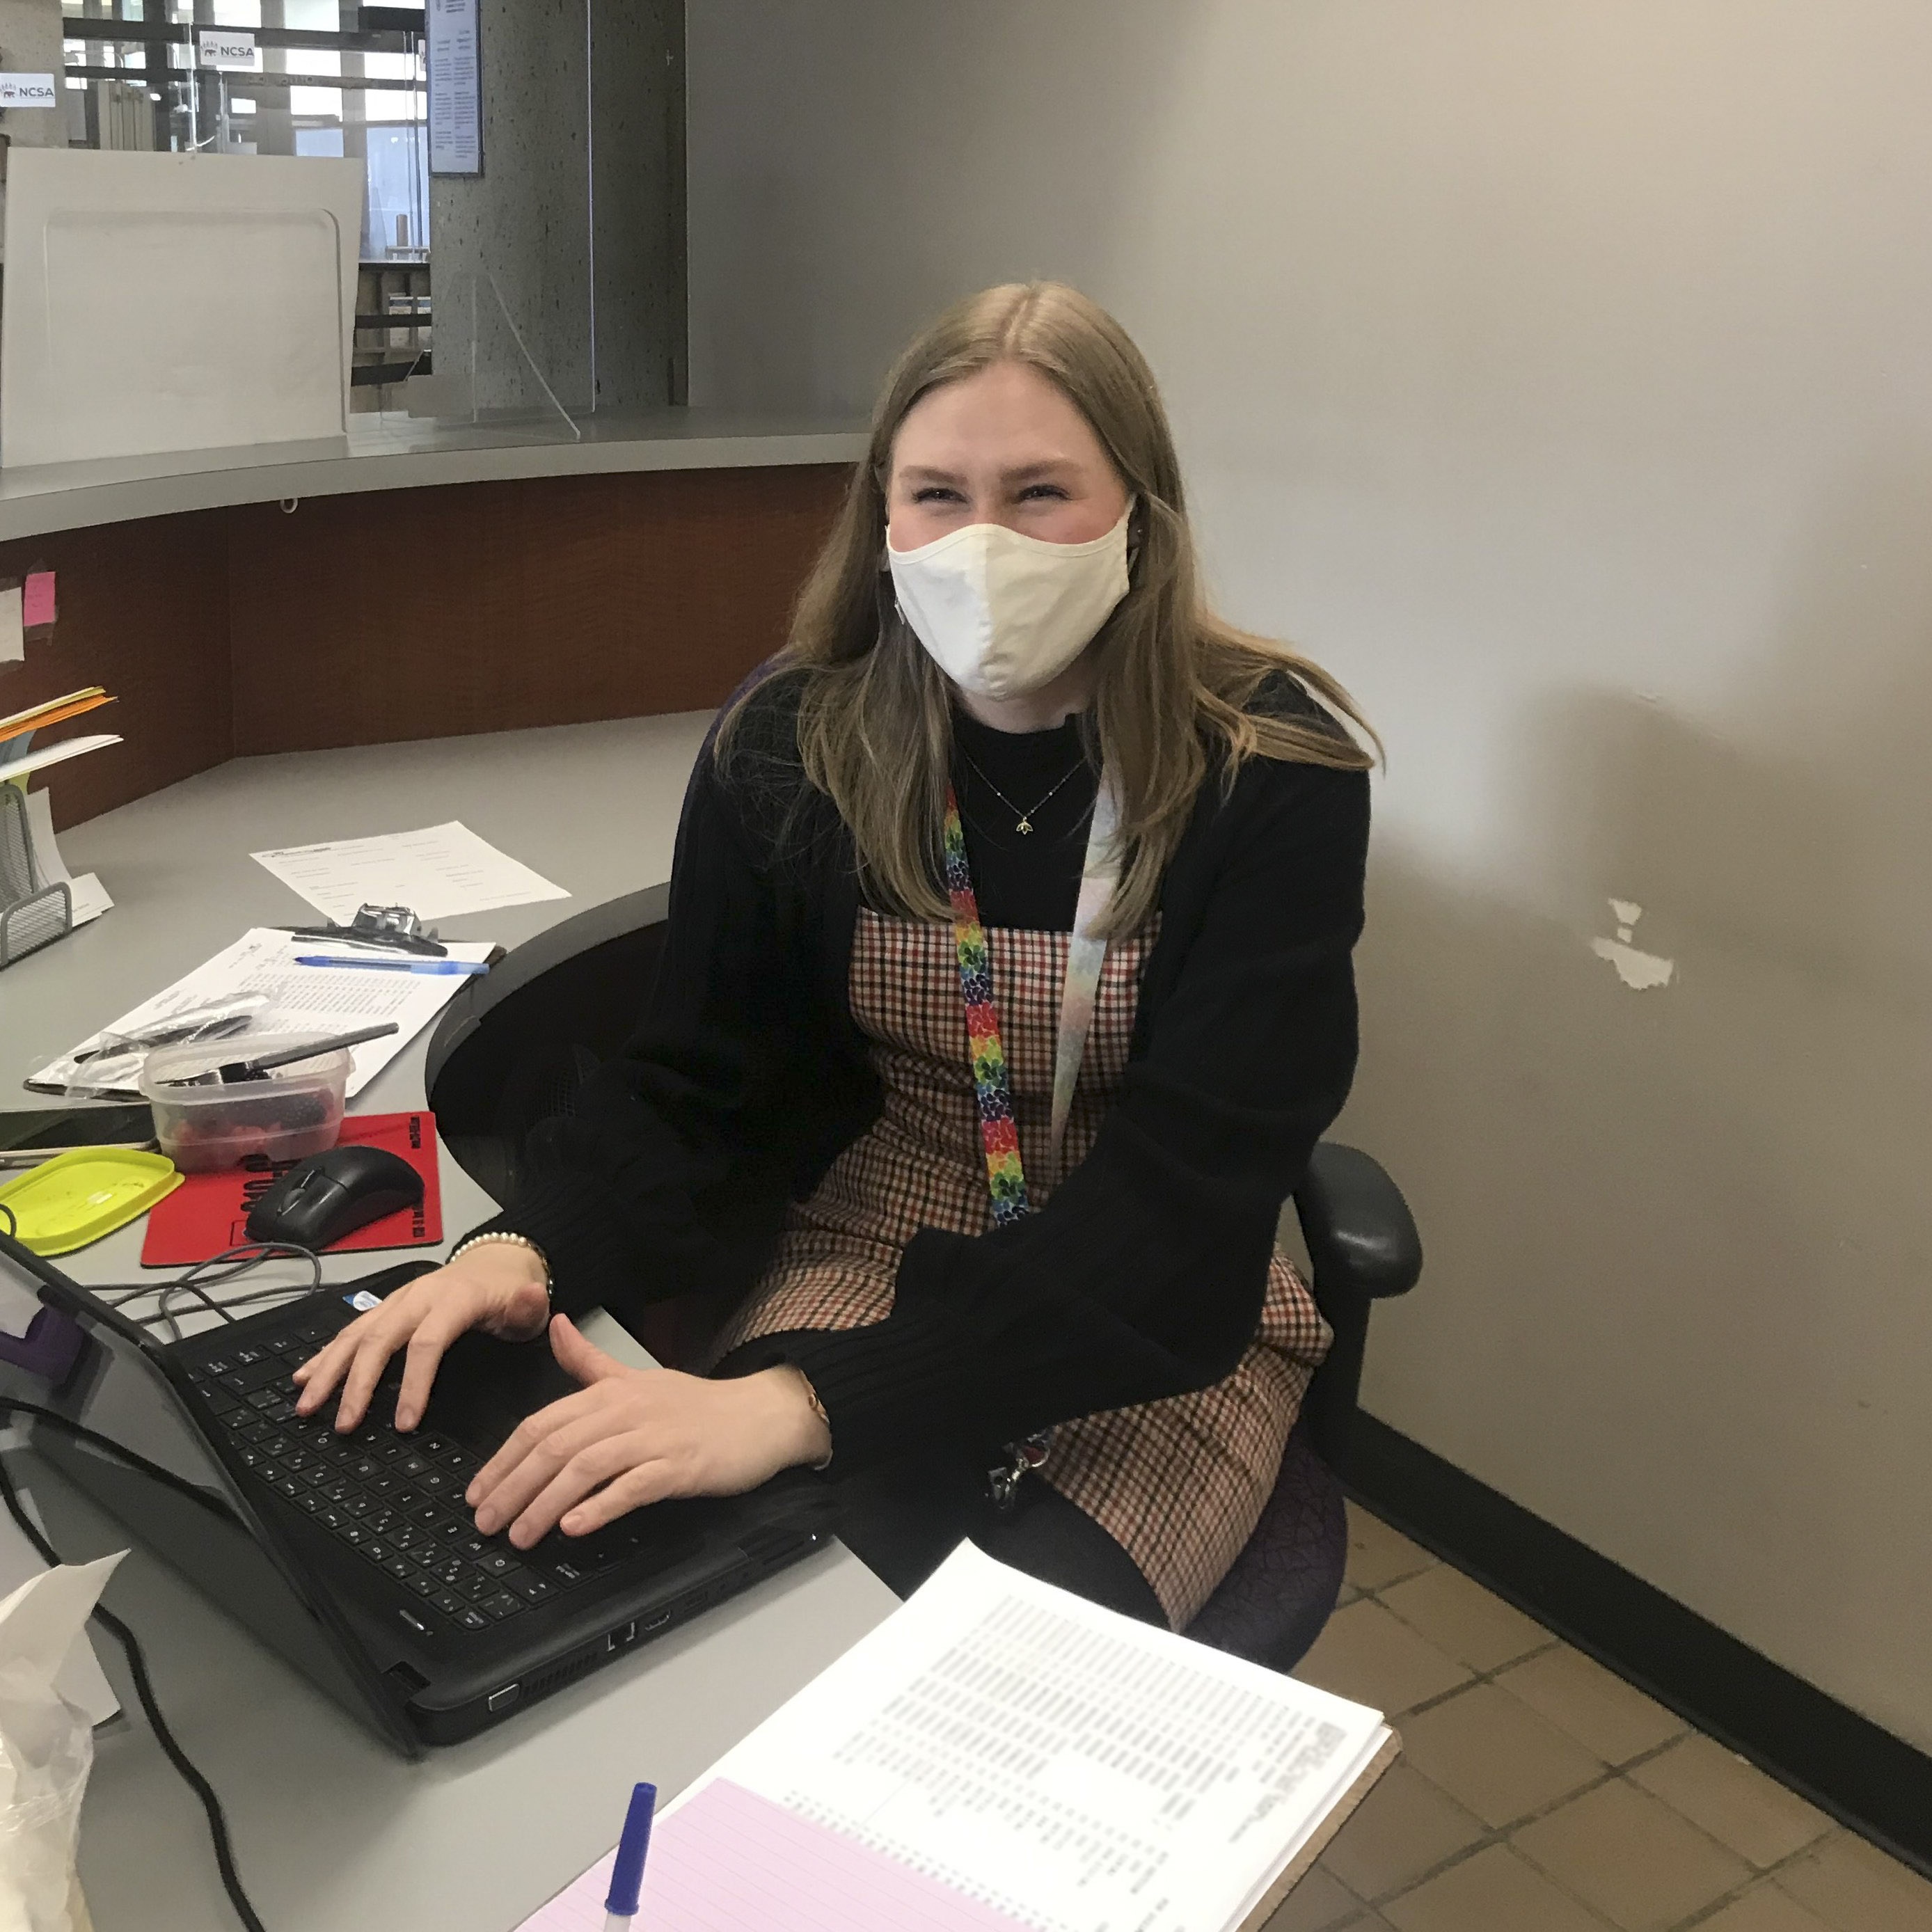 Danielle sits at a desk surrounded by paperwork and is typing on a laptop. She appears to be smiling at the camera even though she's wearing a mask.